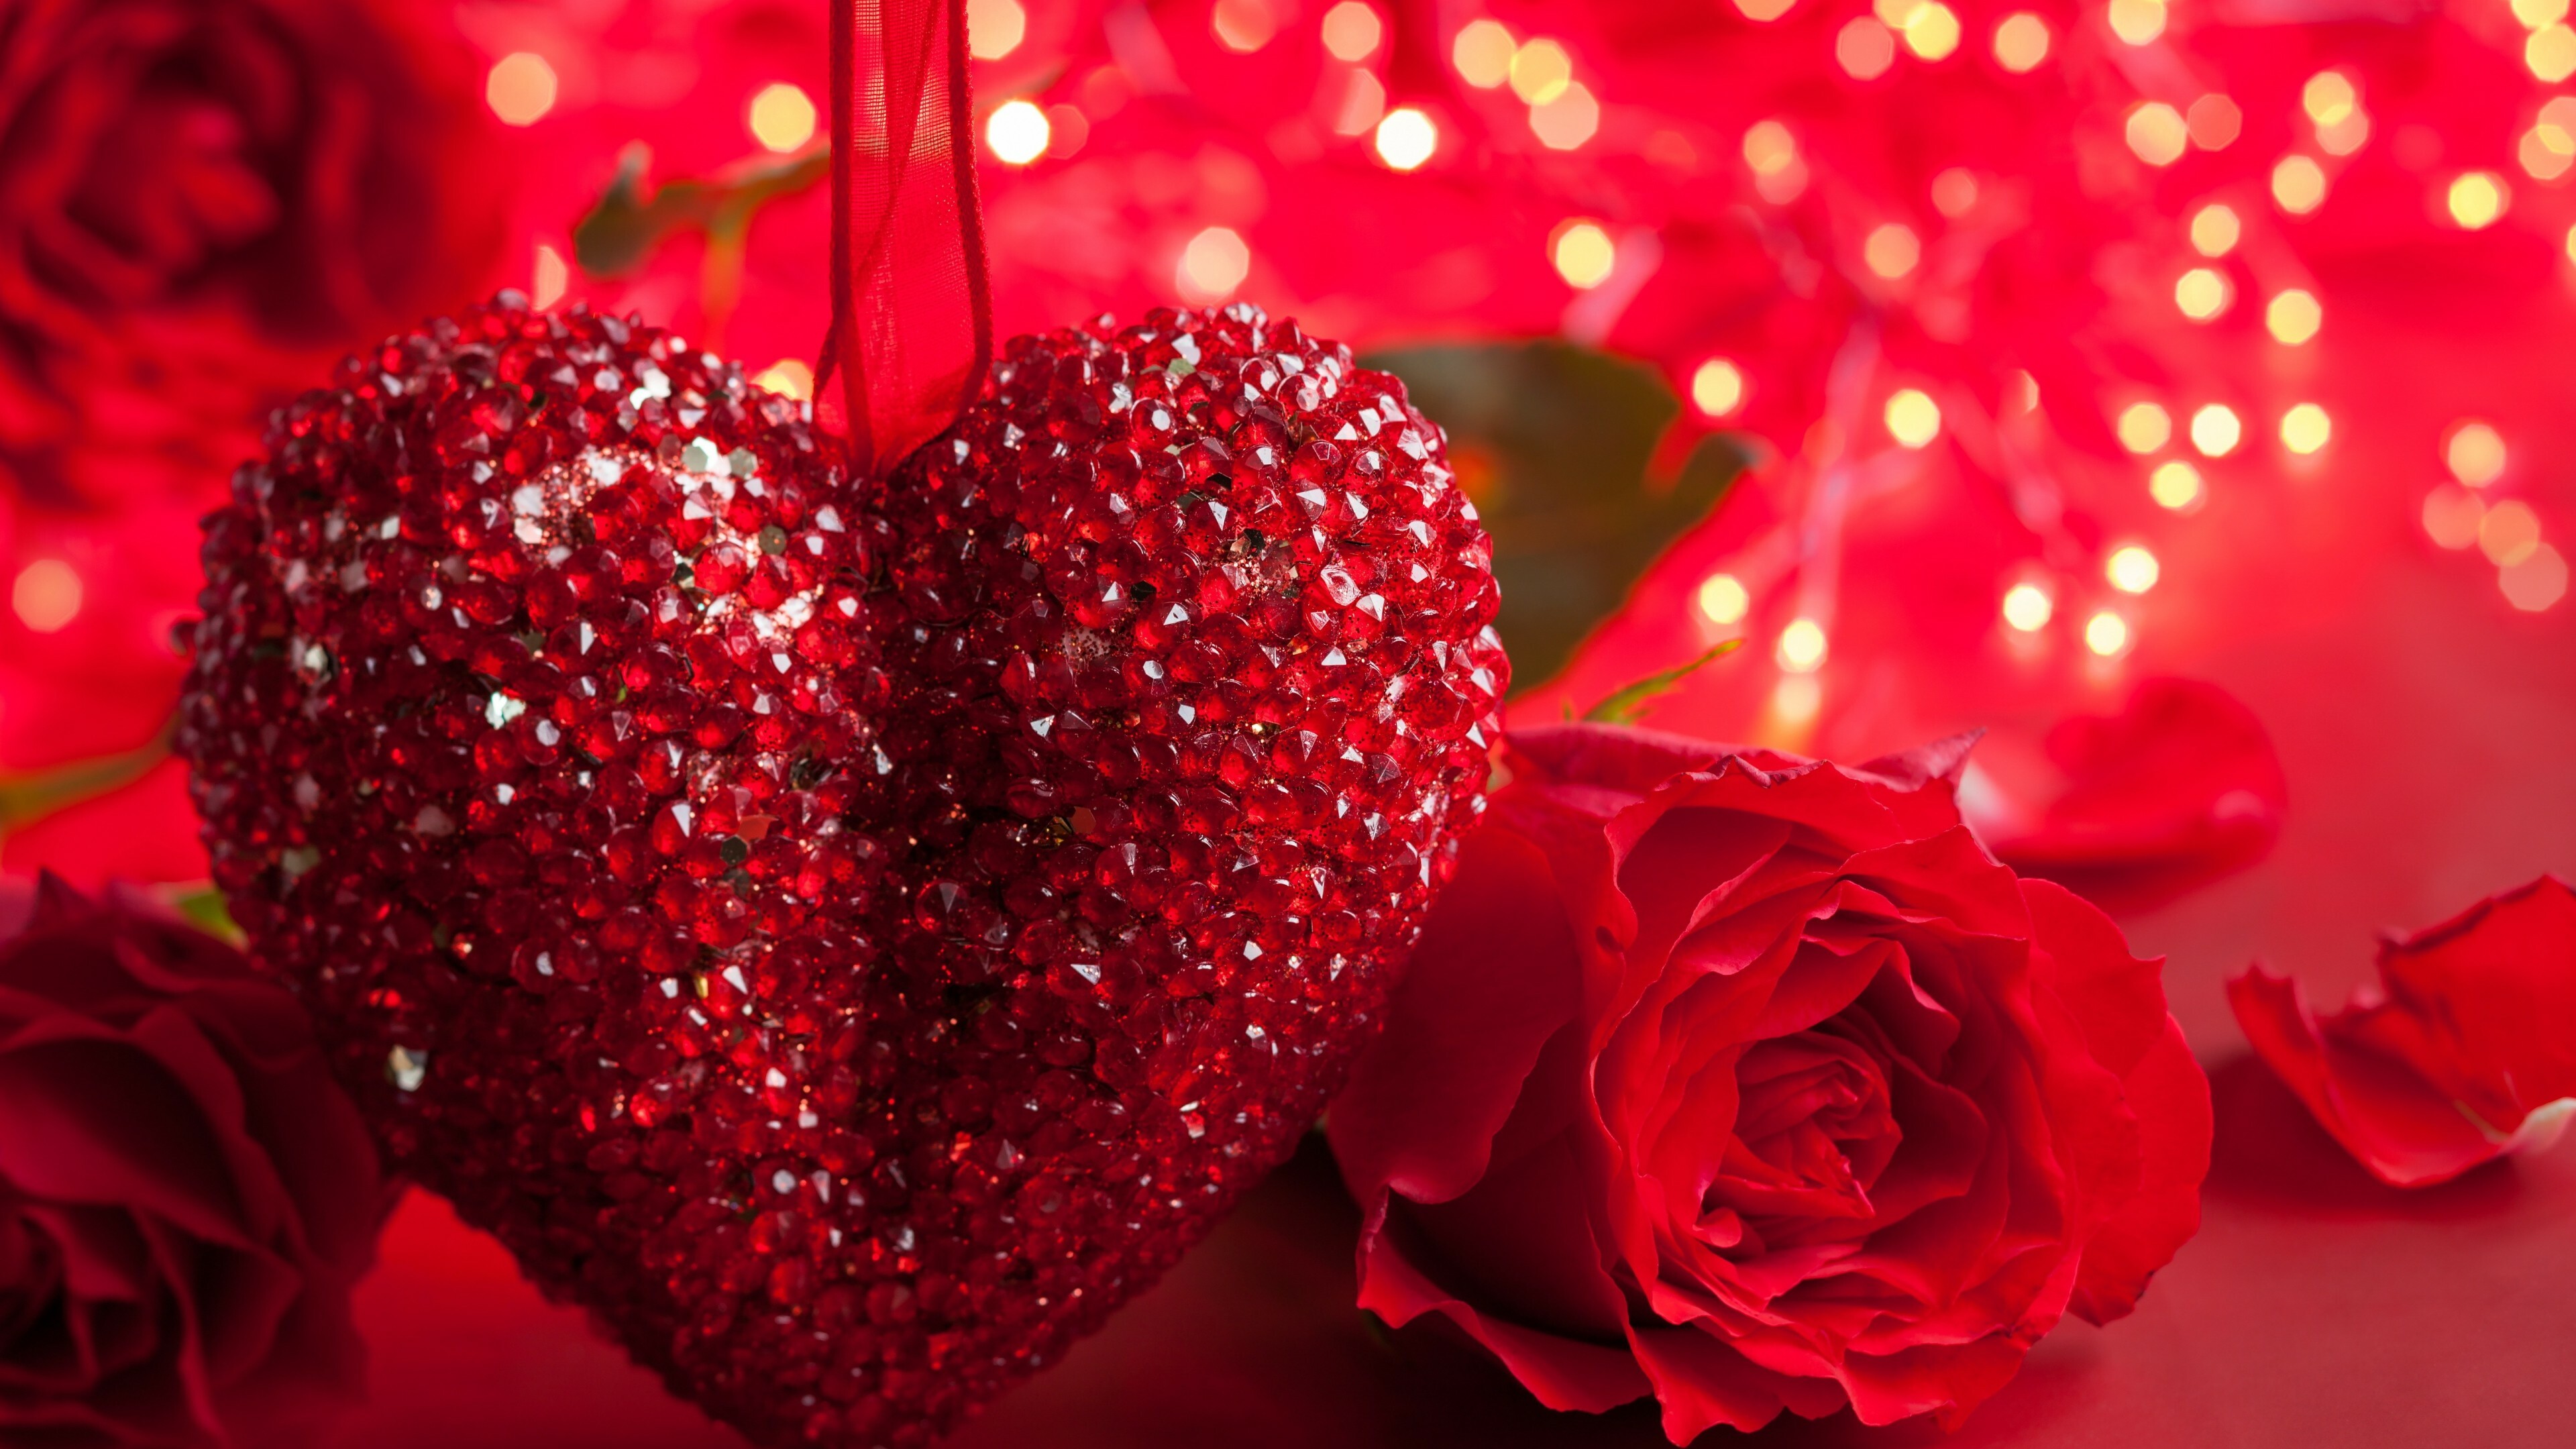 Valentine's Day: A traditional celebration of romantic love, Roses. 3840x2160 4K Wallpaper.